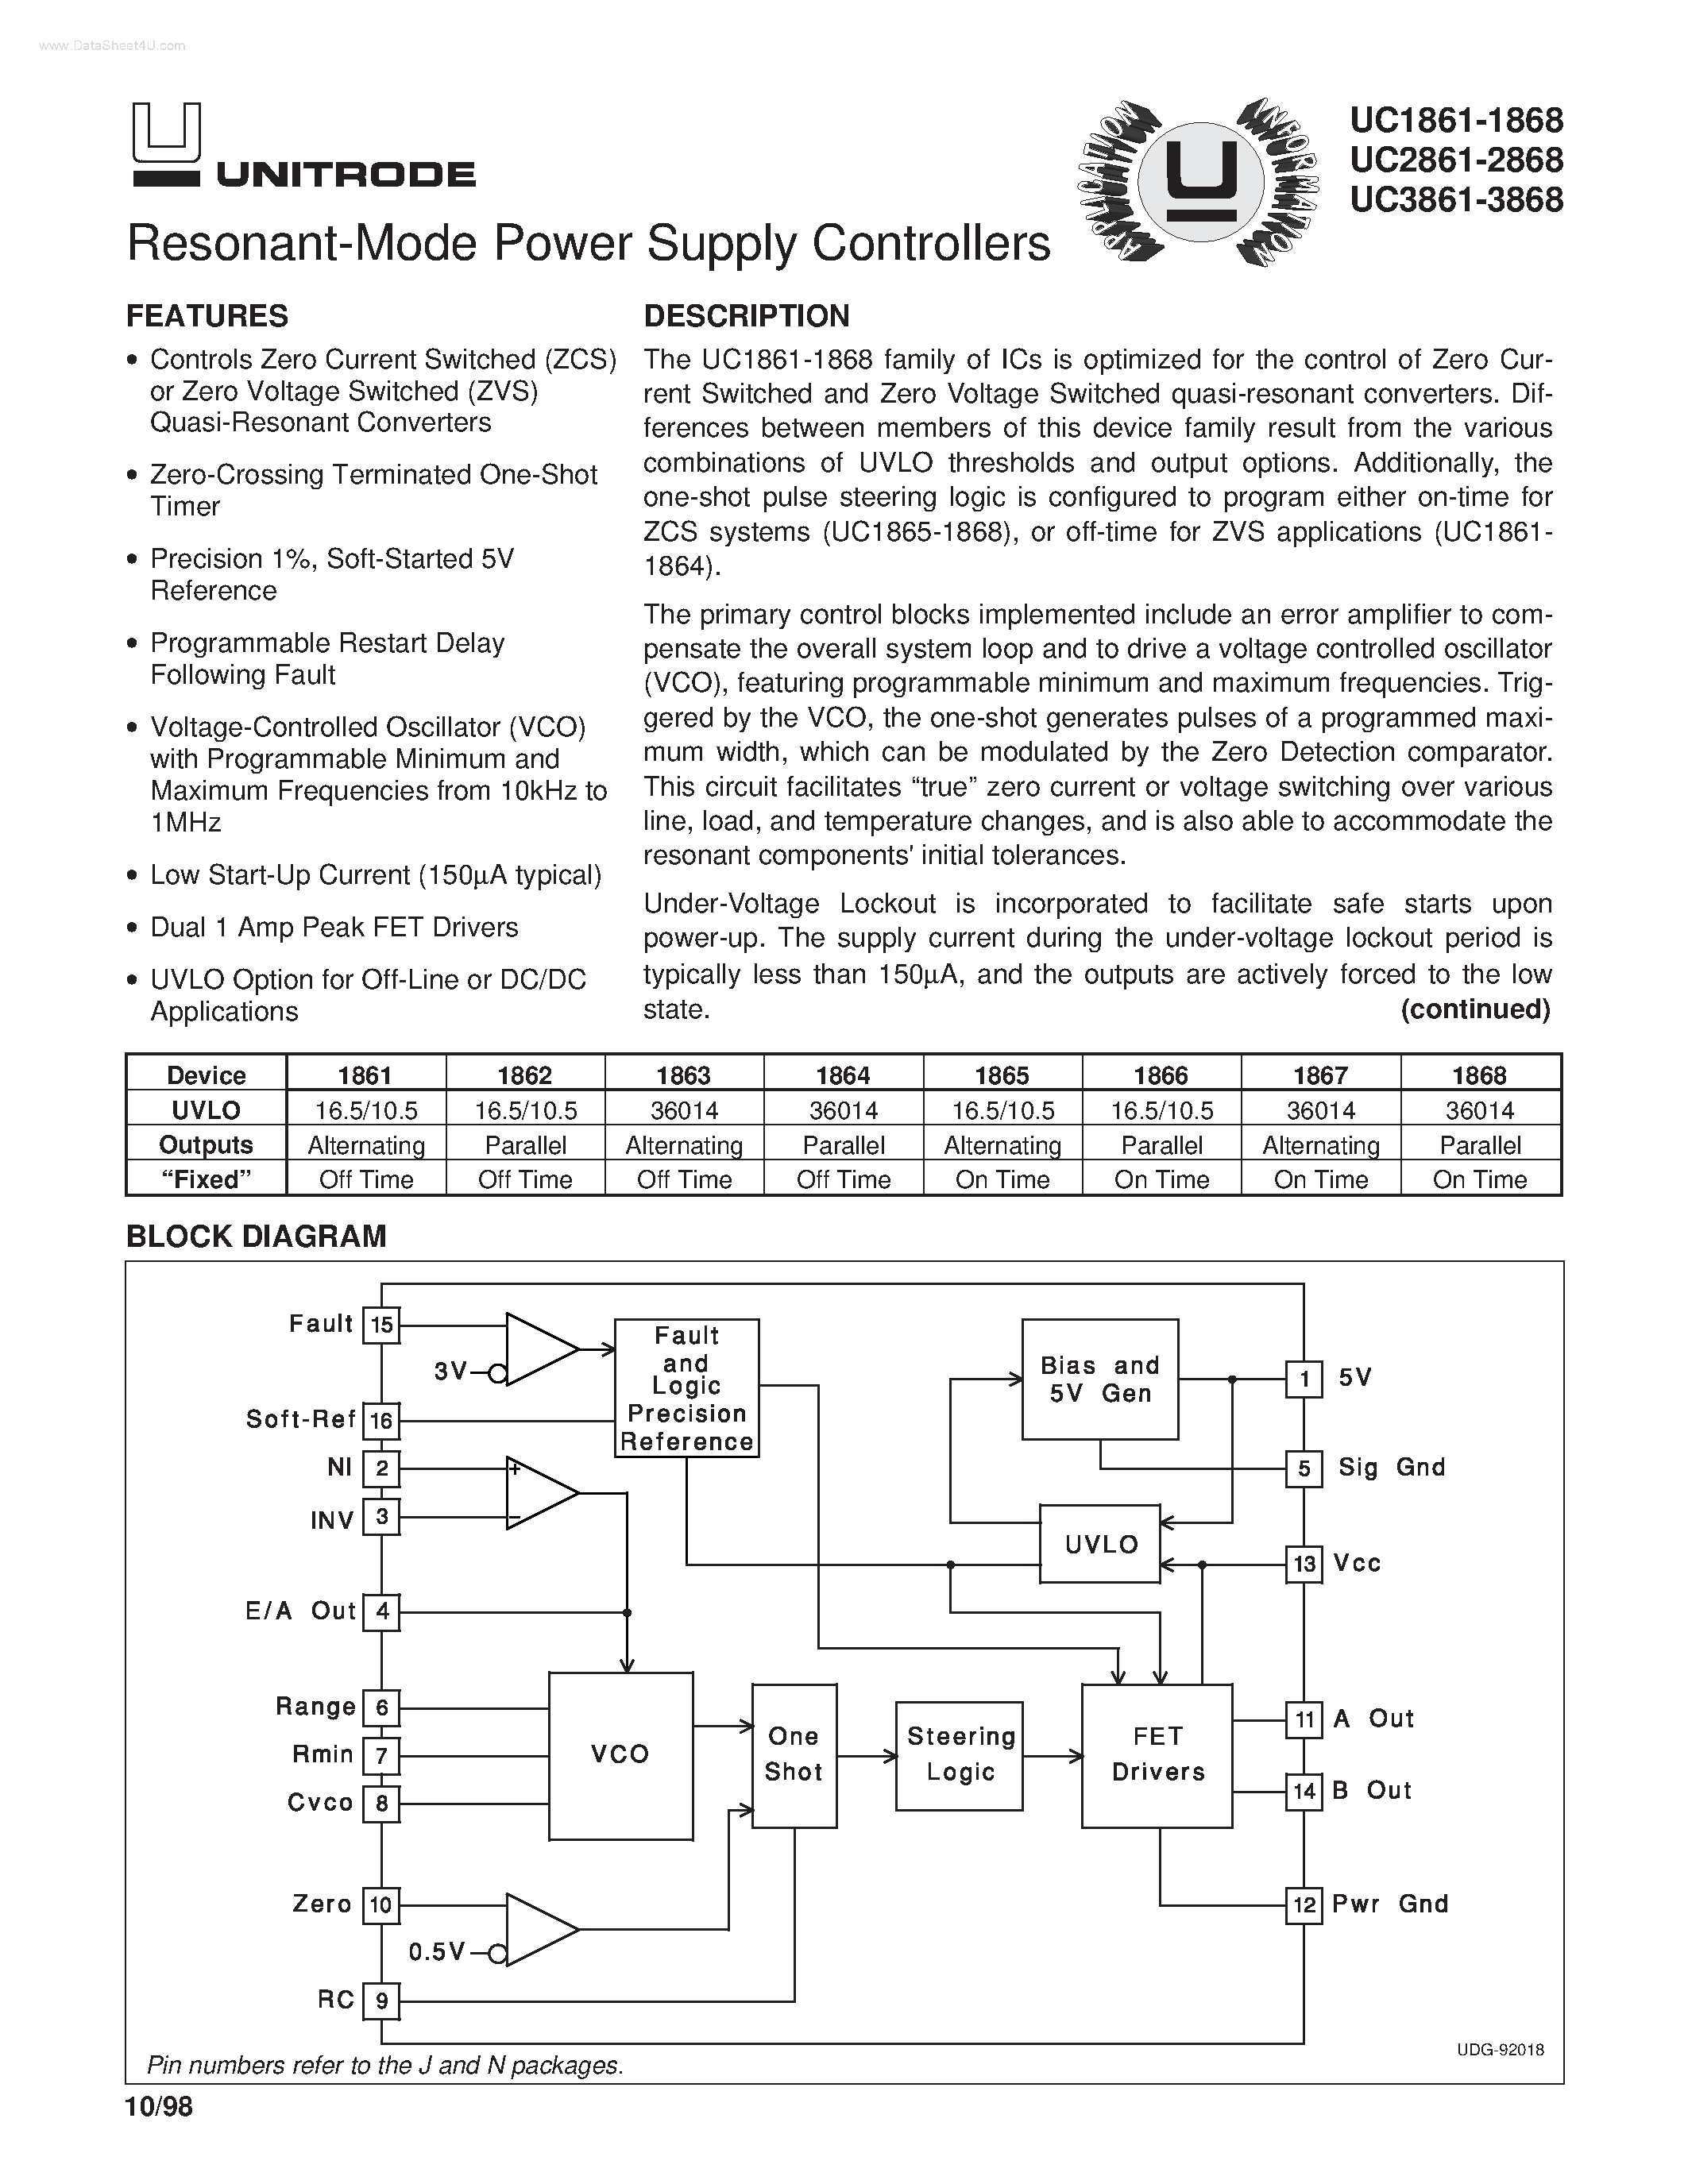 Datasheet UC2861 - (UC2861 - 2868) Resonant-Mode Power Supply Controllers page 1